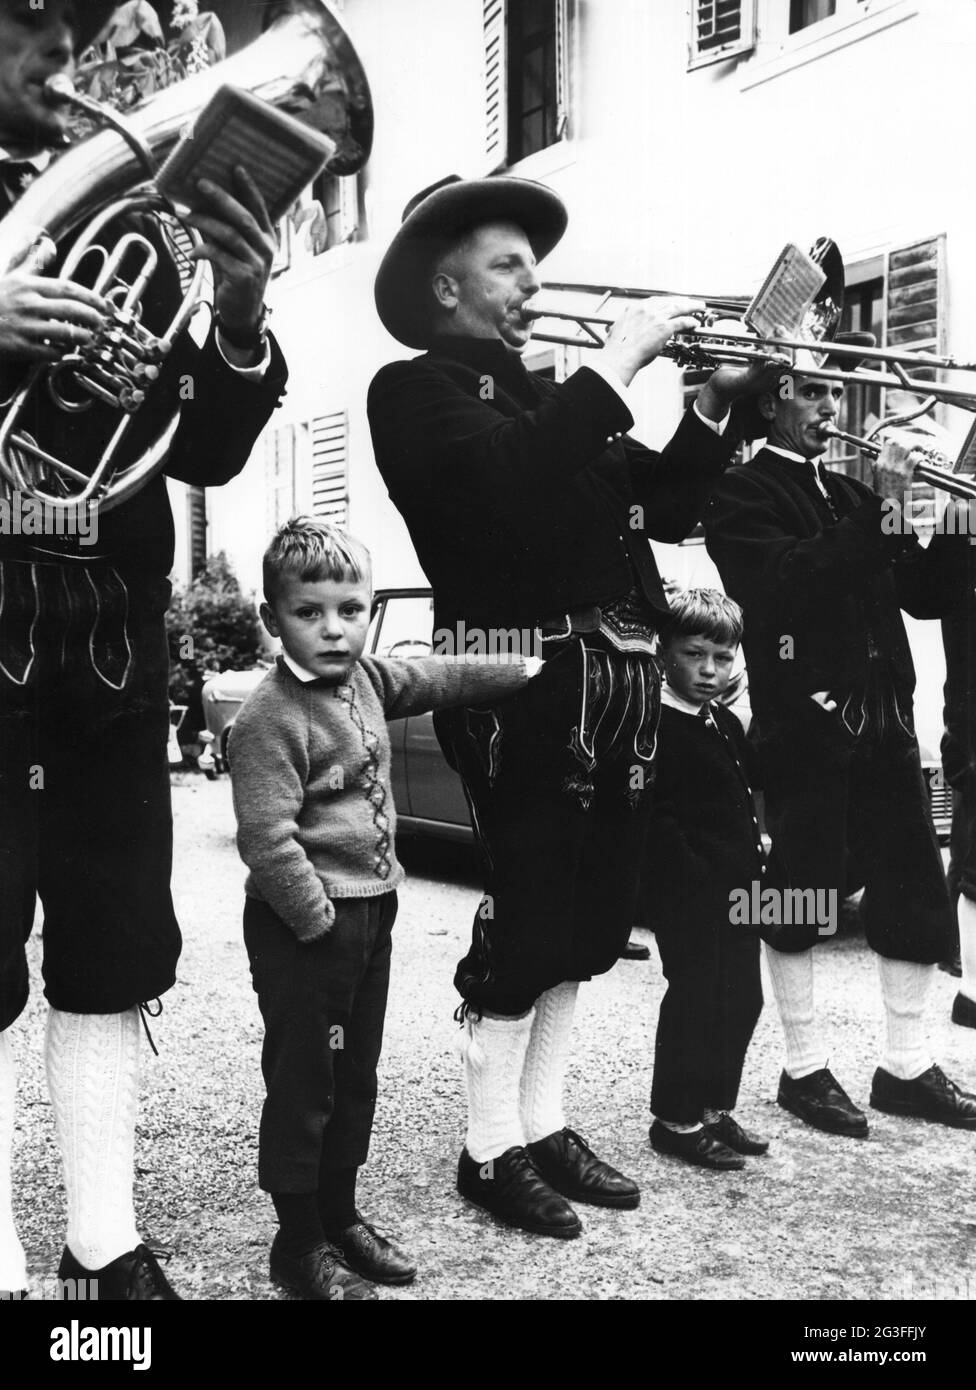 music, musician, brass music, brass band, traditional band, Wald im Pinzgau, Corpus Christi, 1970s, ADDITIONAL-RIGHTS-CLEARANCE-INFO-NOT-AVAILABLE Stock Photo